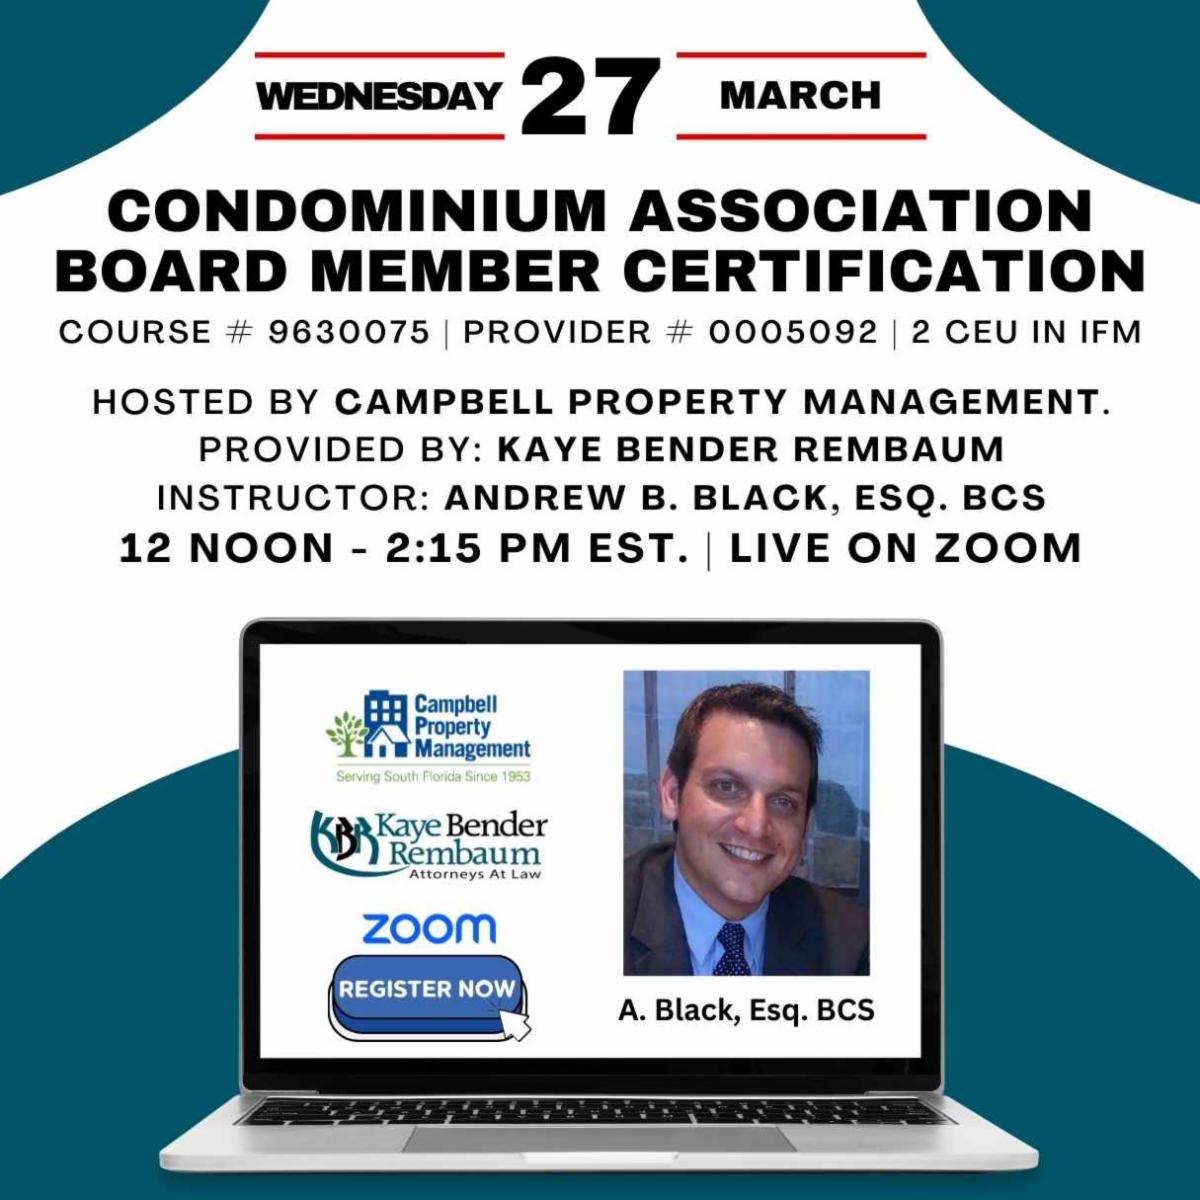 Virtual Condominium Board Certification Course taught by Andrew Black from Kaye Bender Rembaum.